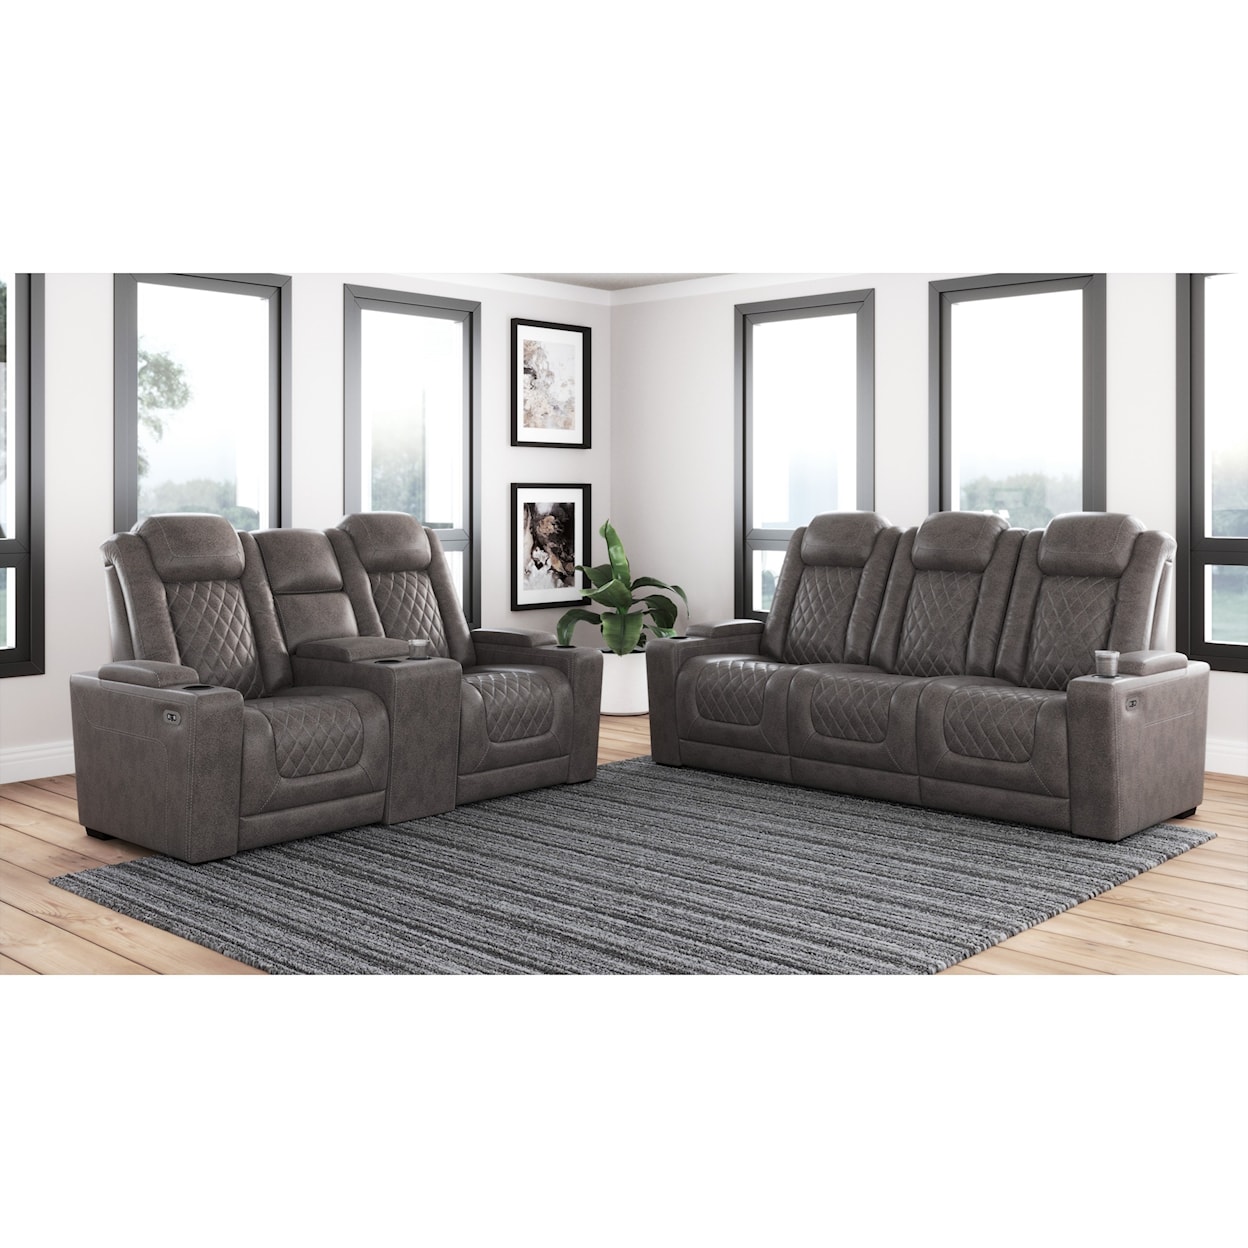 Signature Design by Ashley Furniture Hyllmont Power Reclining Living Room Group